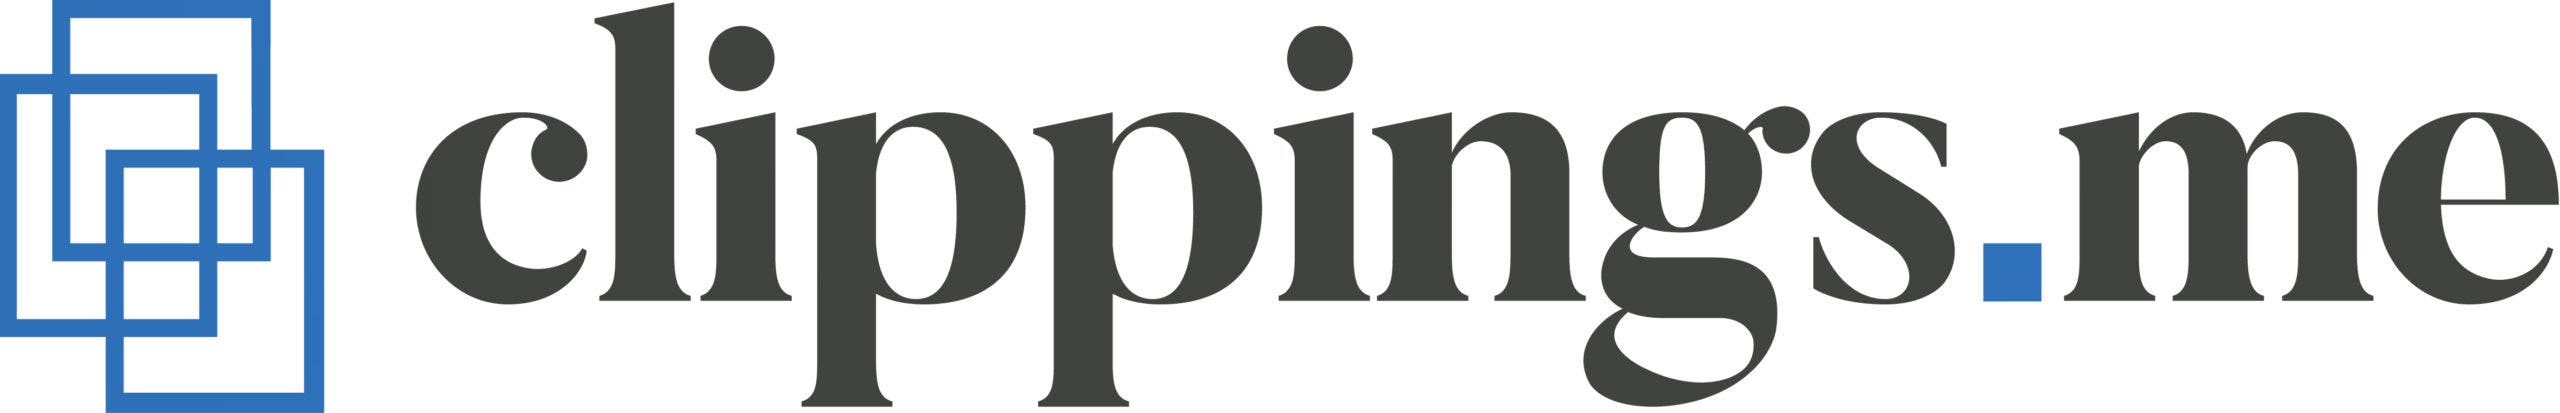 Clippings.me Logo